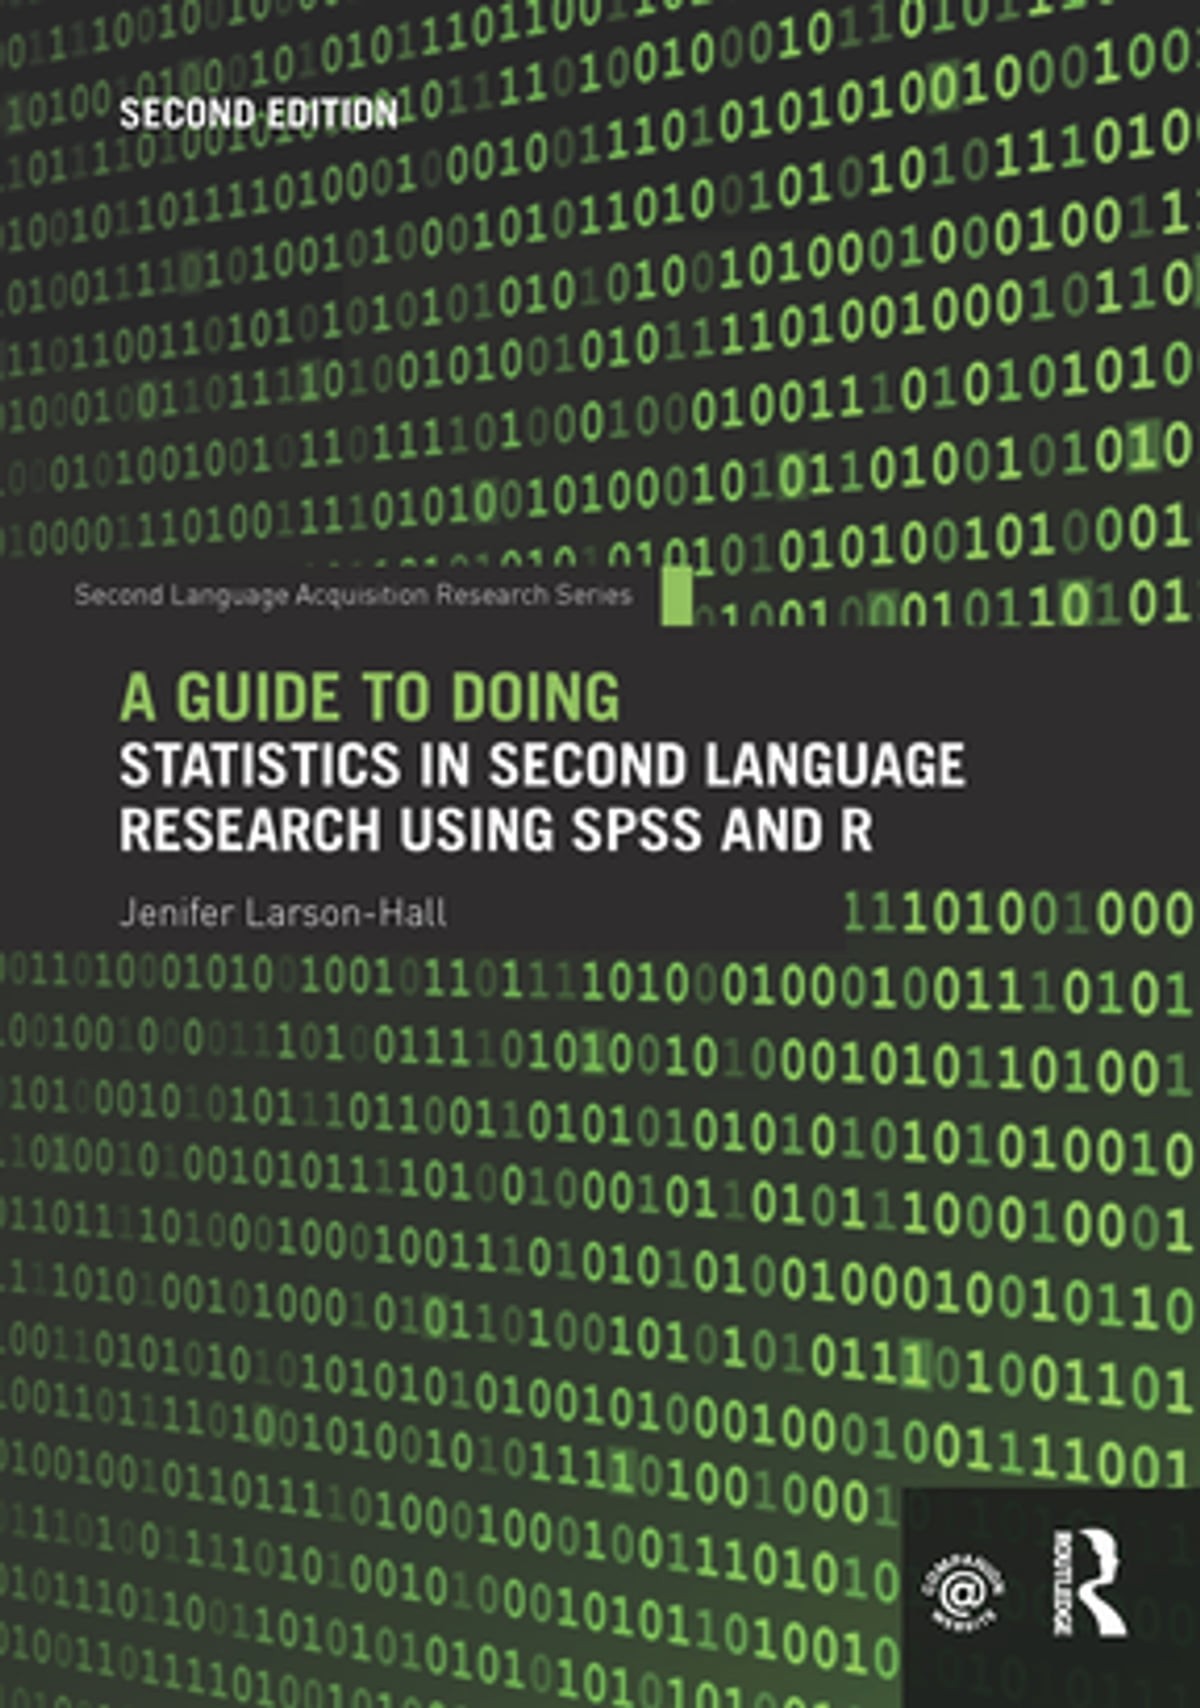 A Guide to Doing Statistics in Second Language Research using SPSS and R